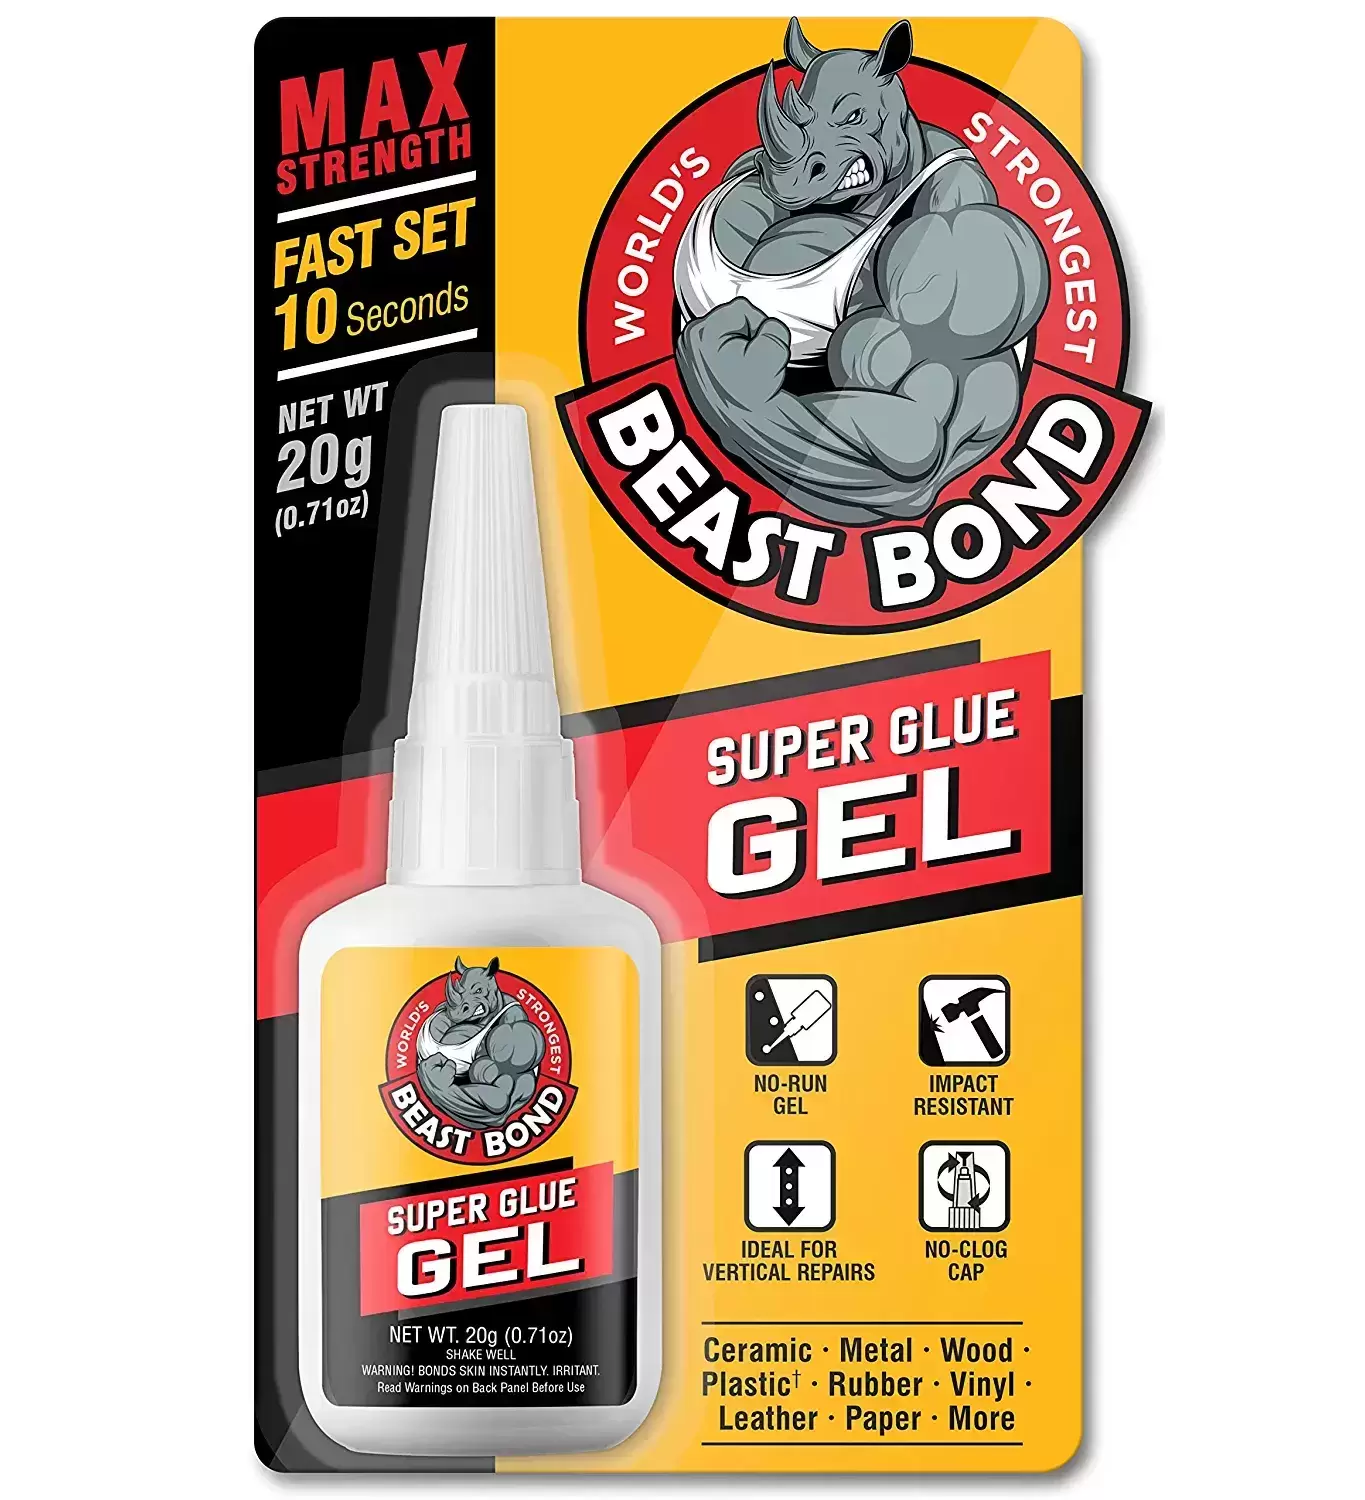 Beast Bond Epoxy Resin Kit, 1 Gallon High-Performance Epoxy Resin, Self-Leveling, Crystal Clear and Ultra-Glossy, Perfect for Table Tops, Crafts